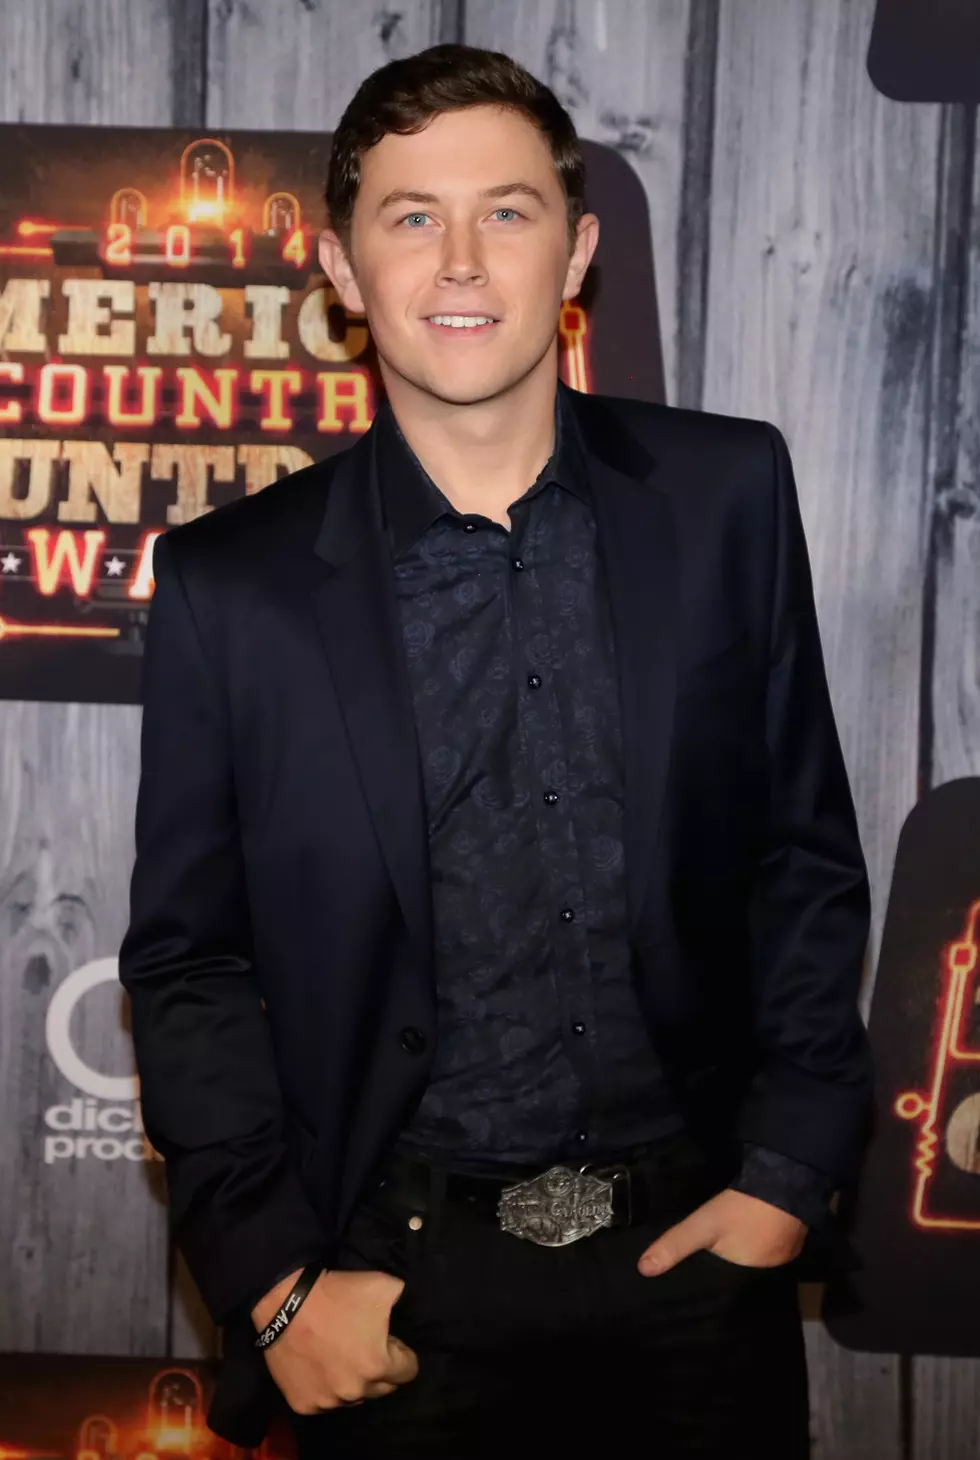 Scotty McCreery Goes Old School at the Opry [VIDEO]